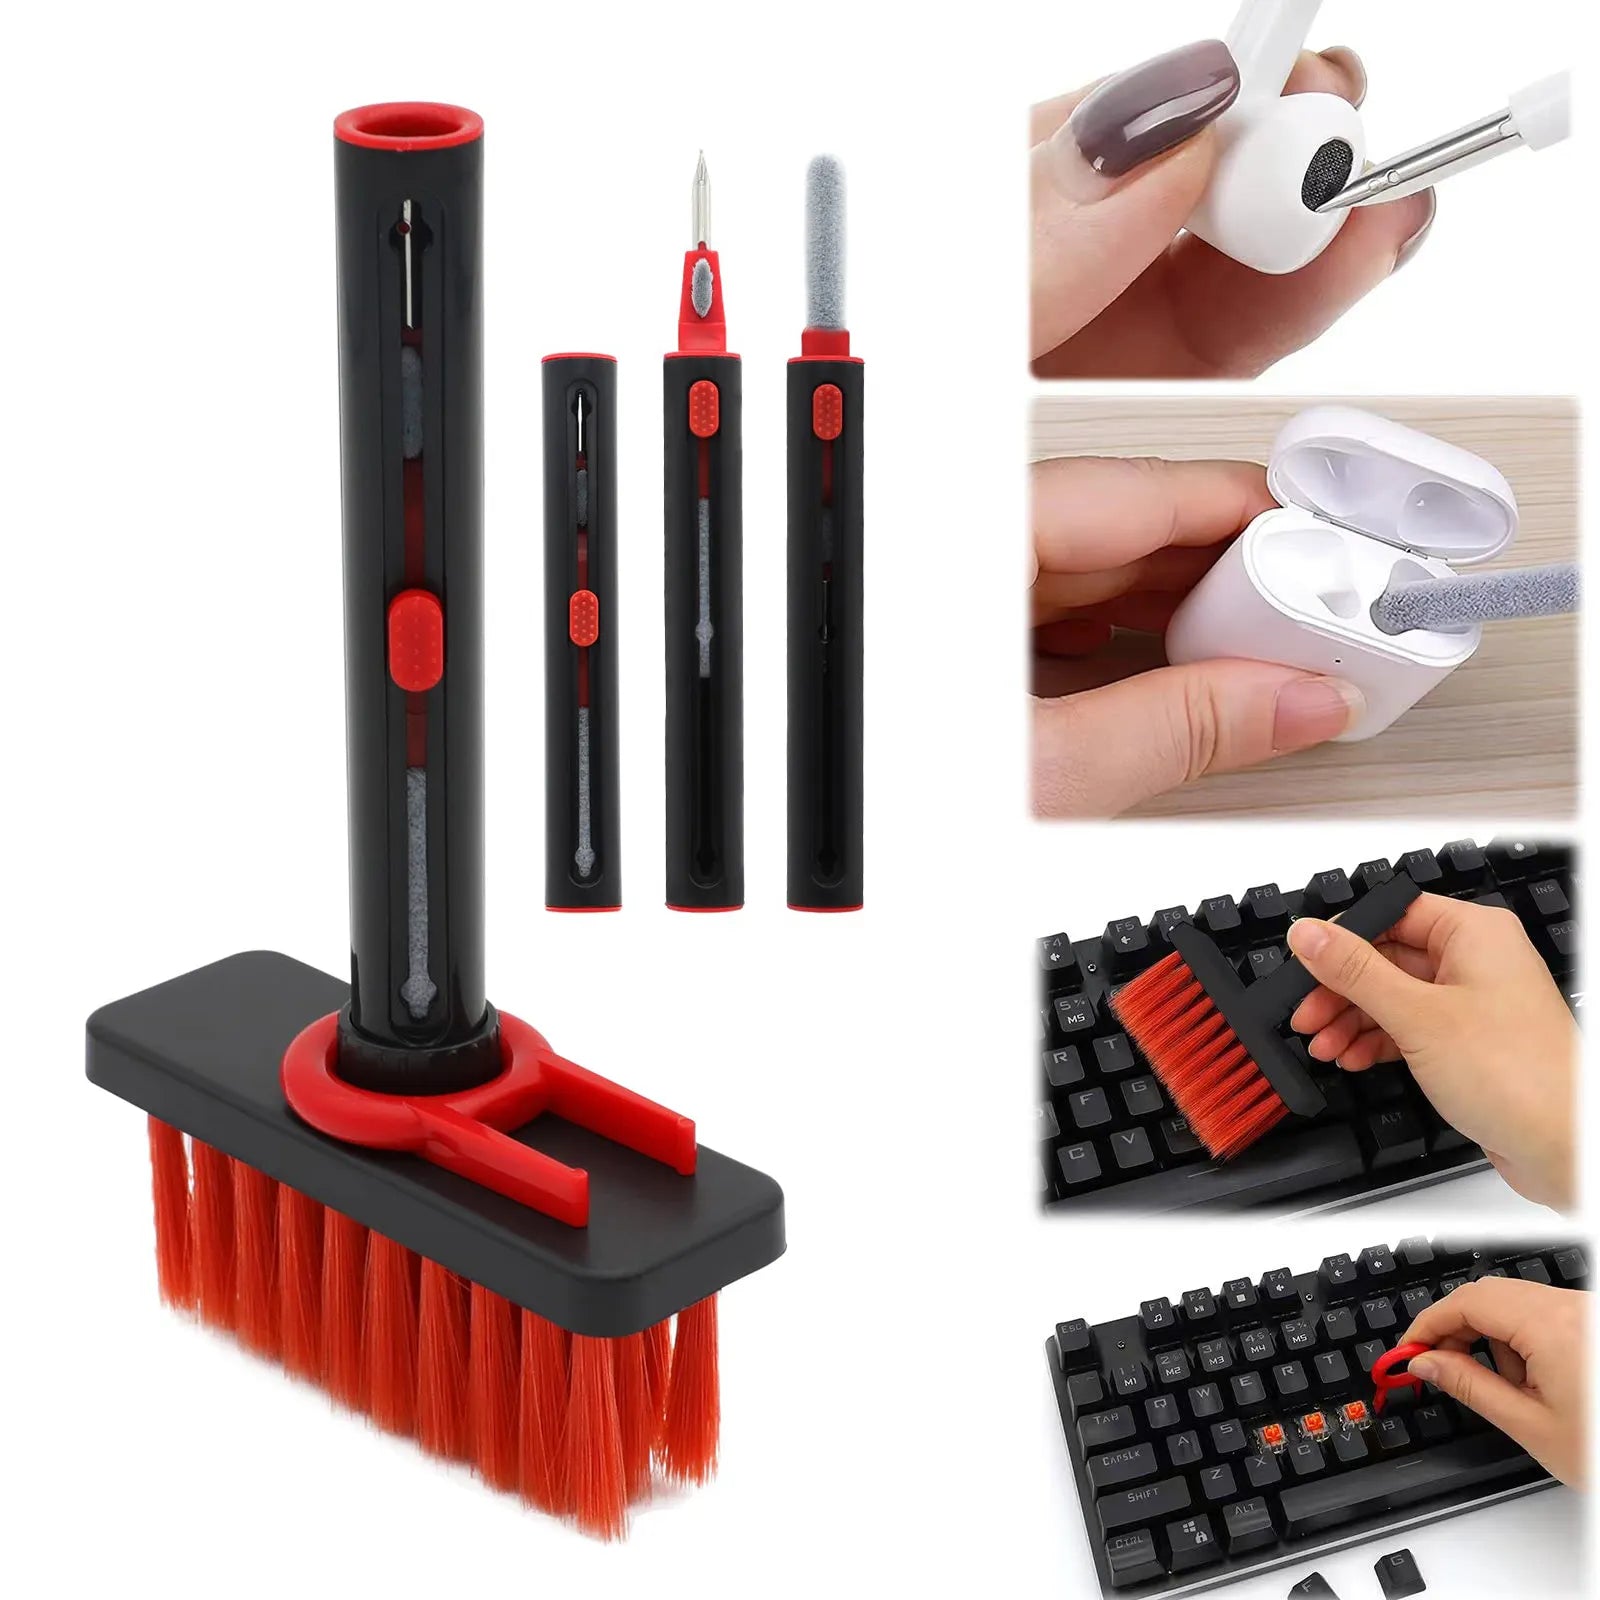 Ultimate Electronics Cleaning Kit: Efficient & Gentle Keyboard Care  ourlum.com   